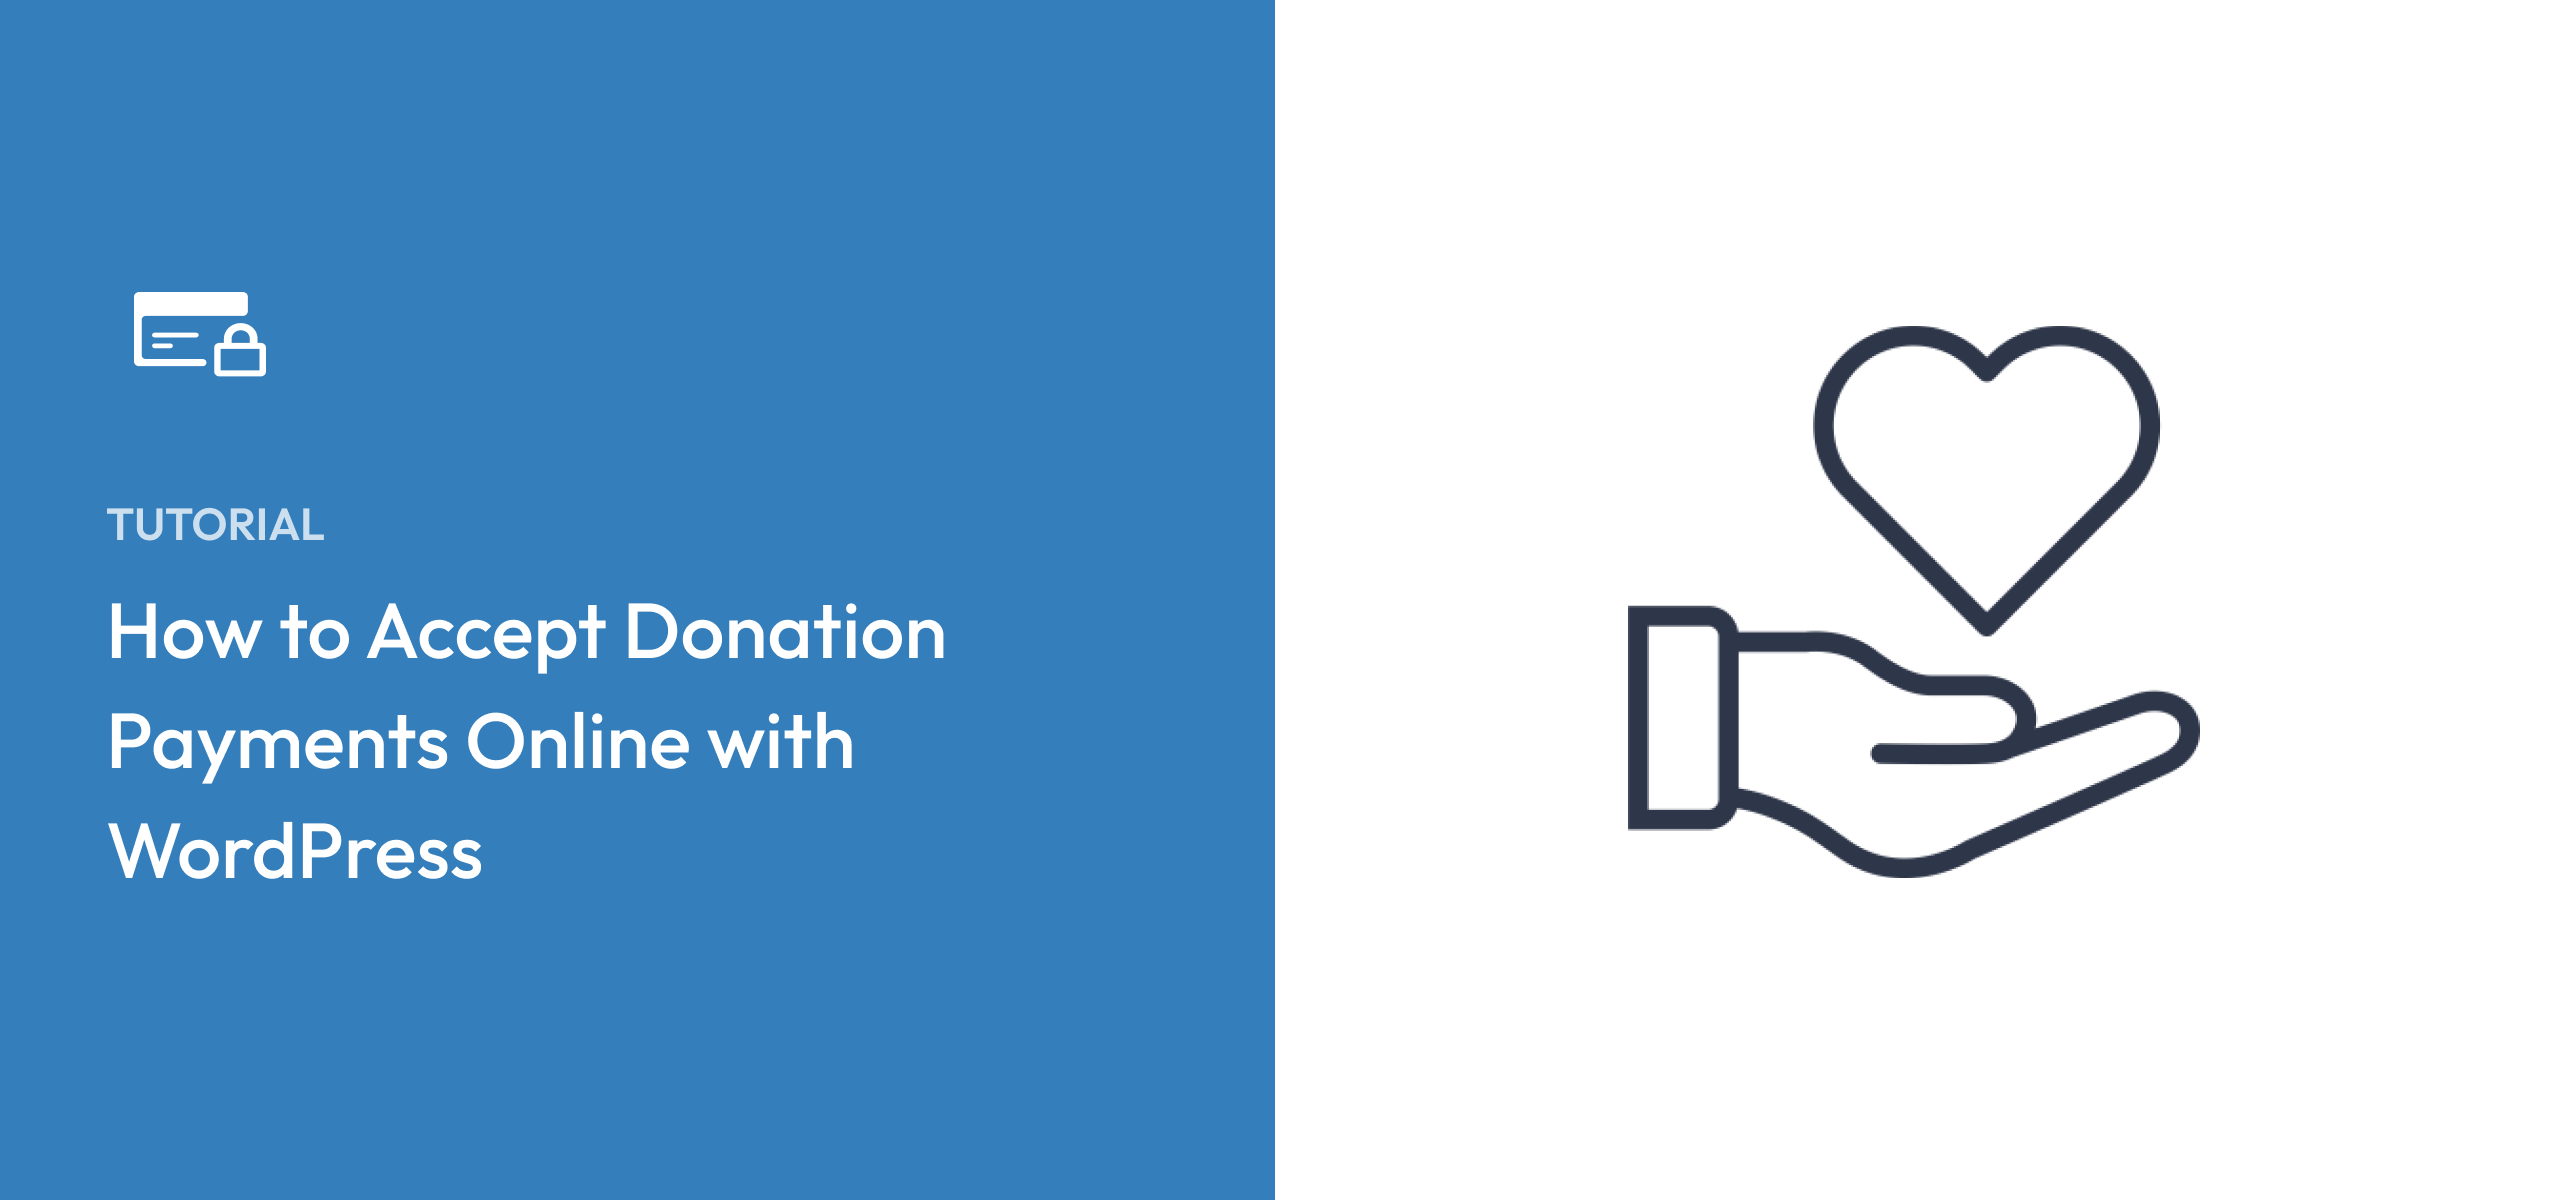 How to Accept Donation Payments Online with WordPress